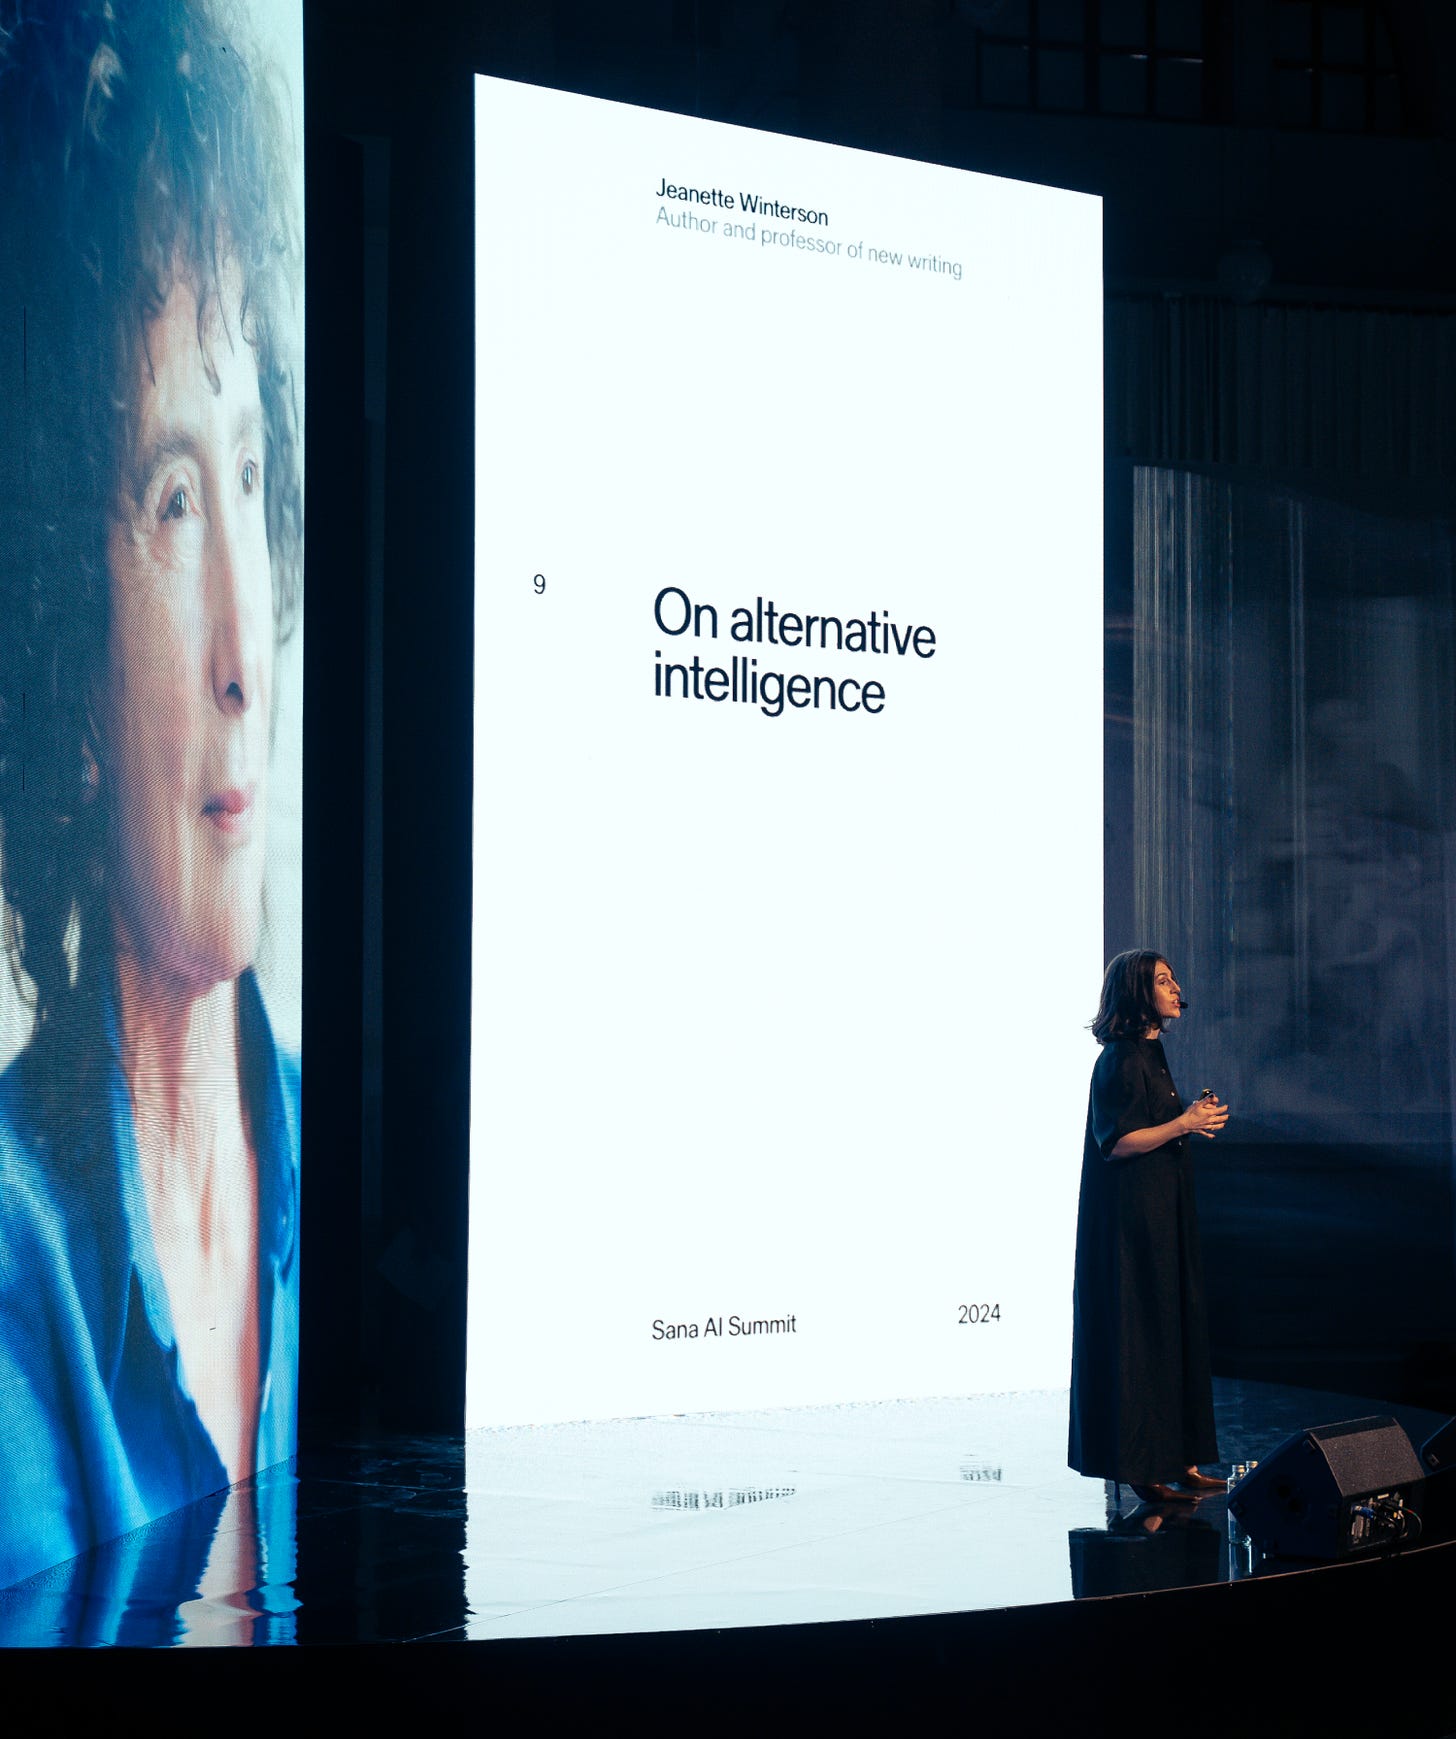 Photograph of Pass It On creator Lauren Crichton standing in front of two giant LED screens on stage at Sana AI Summit. On one LED screen is a photograph of Jeanette Winterson. On the other reads the title of Jeanette's keynote "On alternative intelligence."